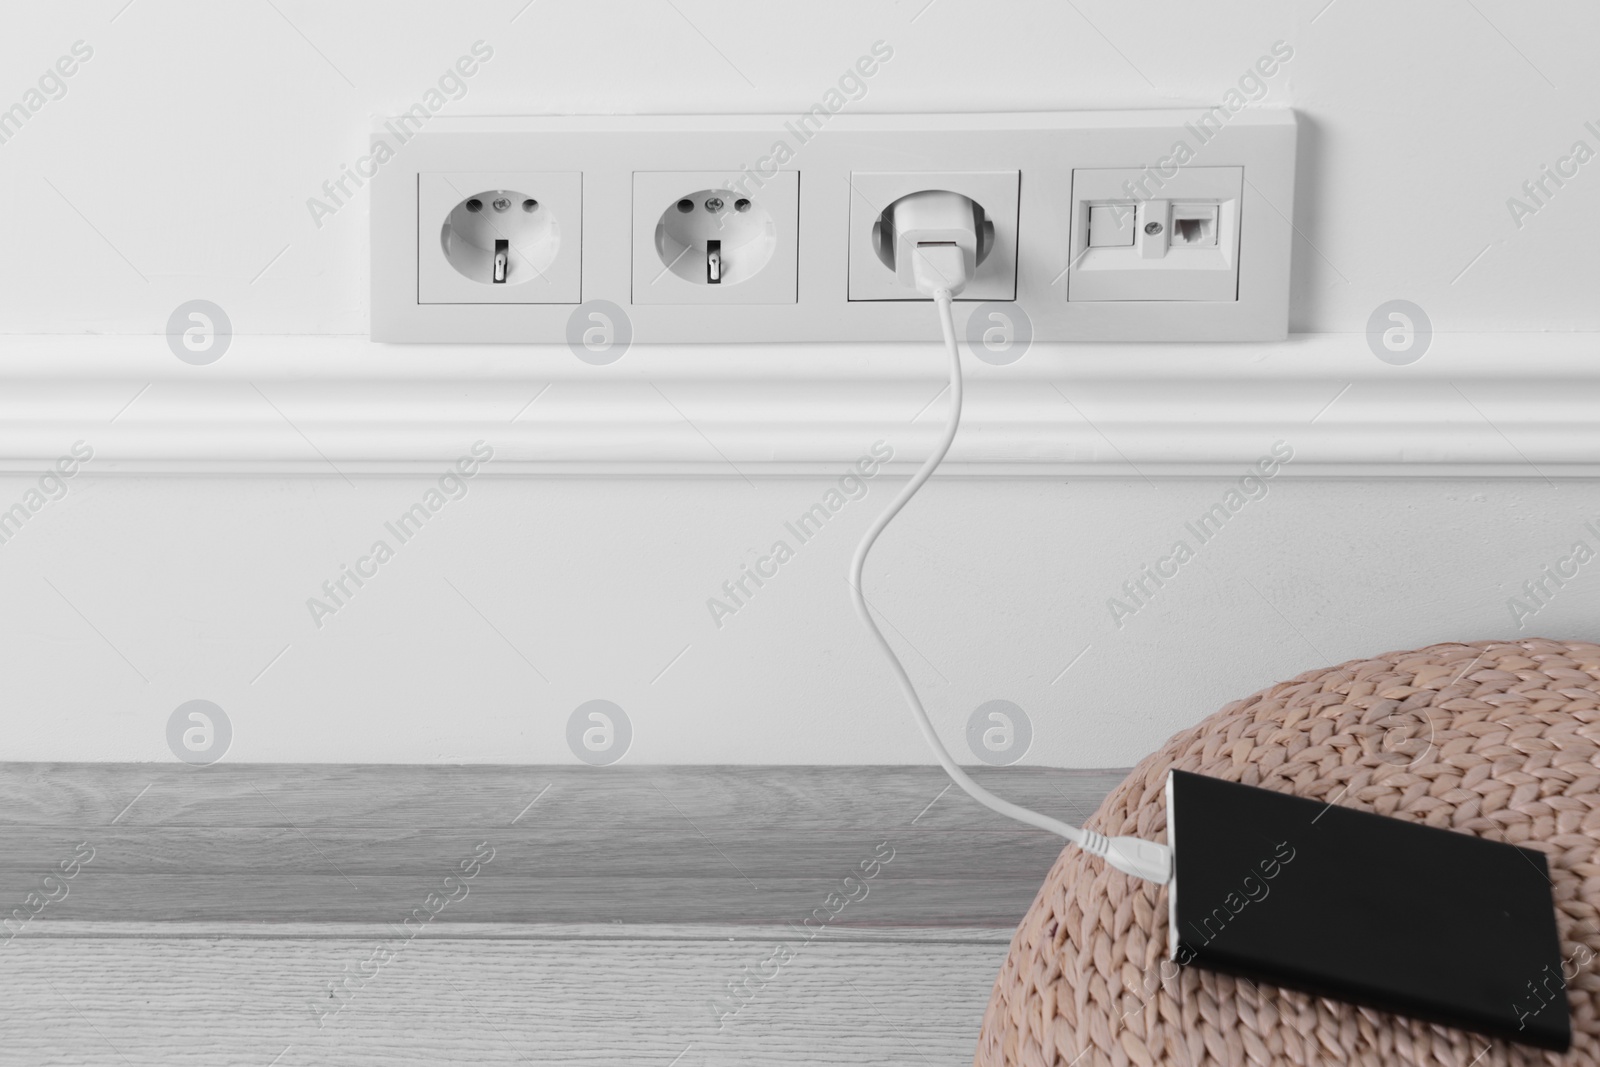 Photo of Power bank plugged into electric socket on white wall